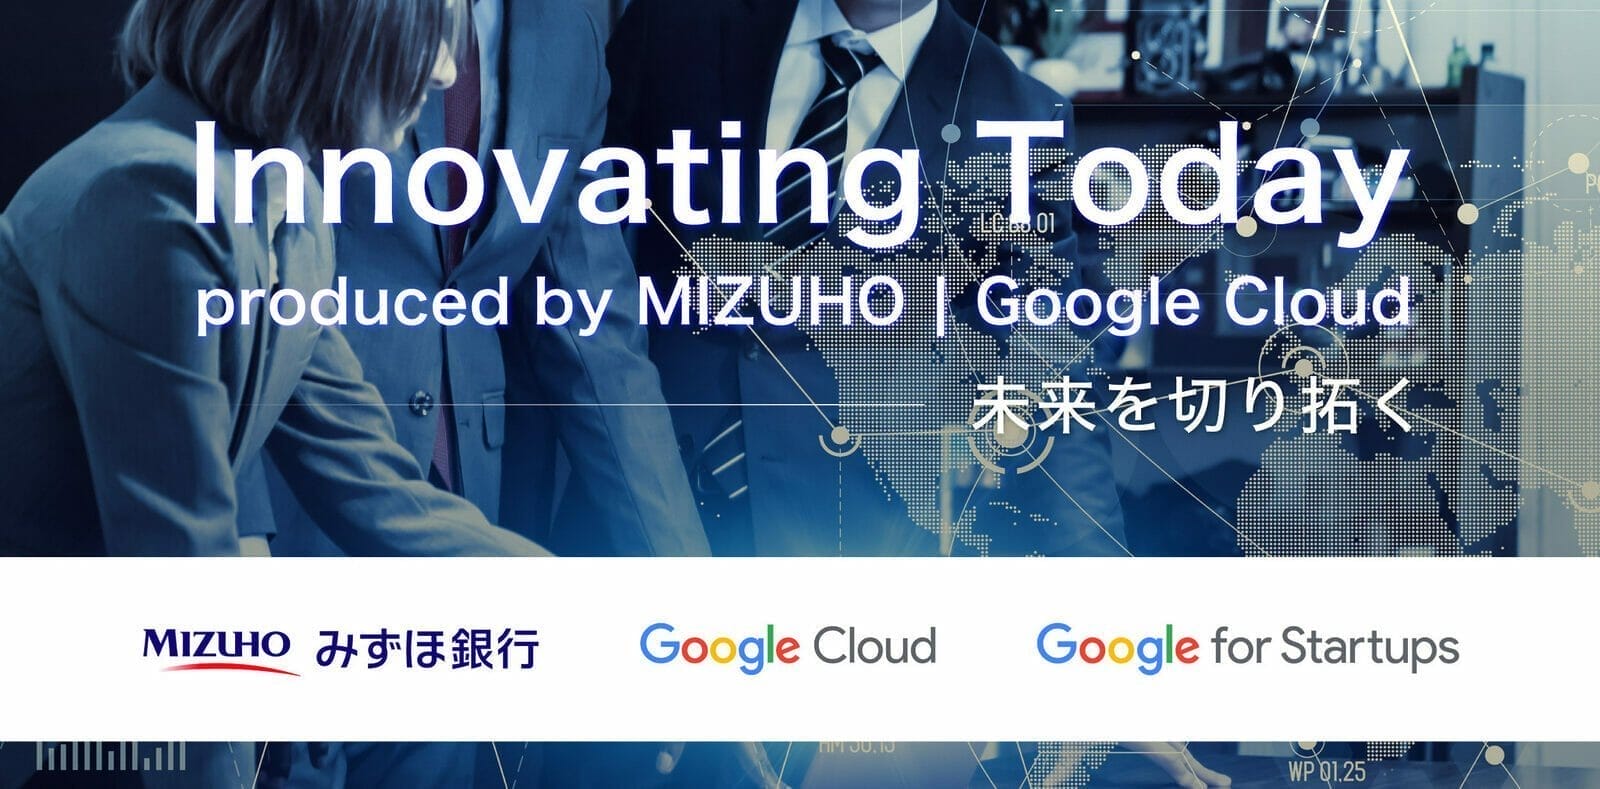 [Google for Startups] Innovating Today produced by MIZUHO | Google Cloud